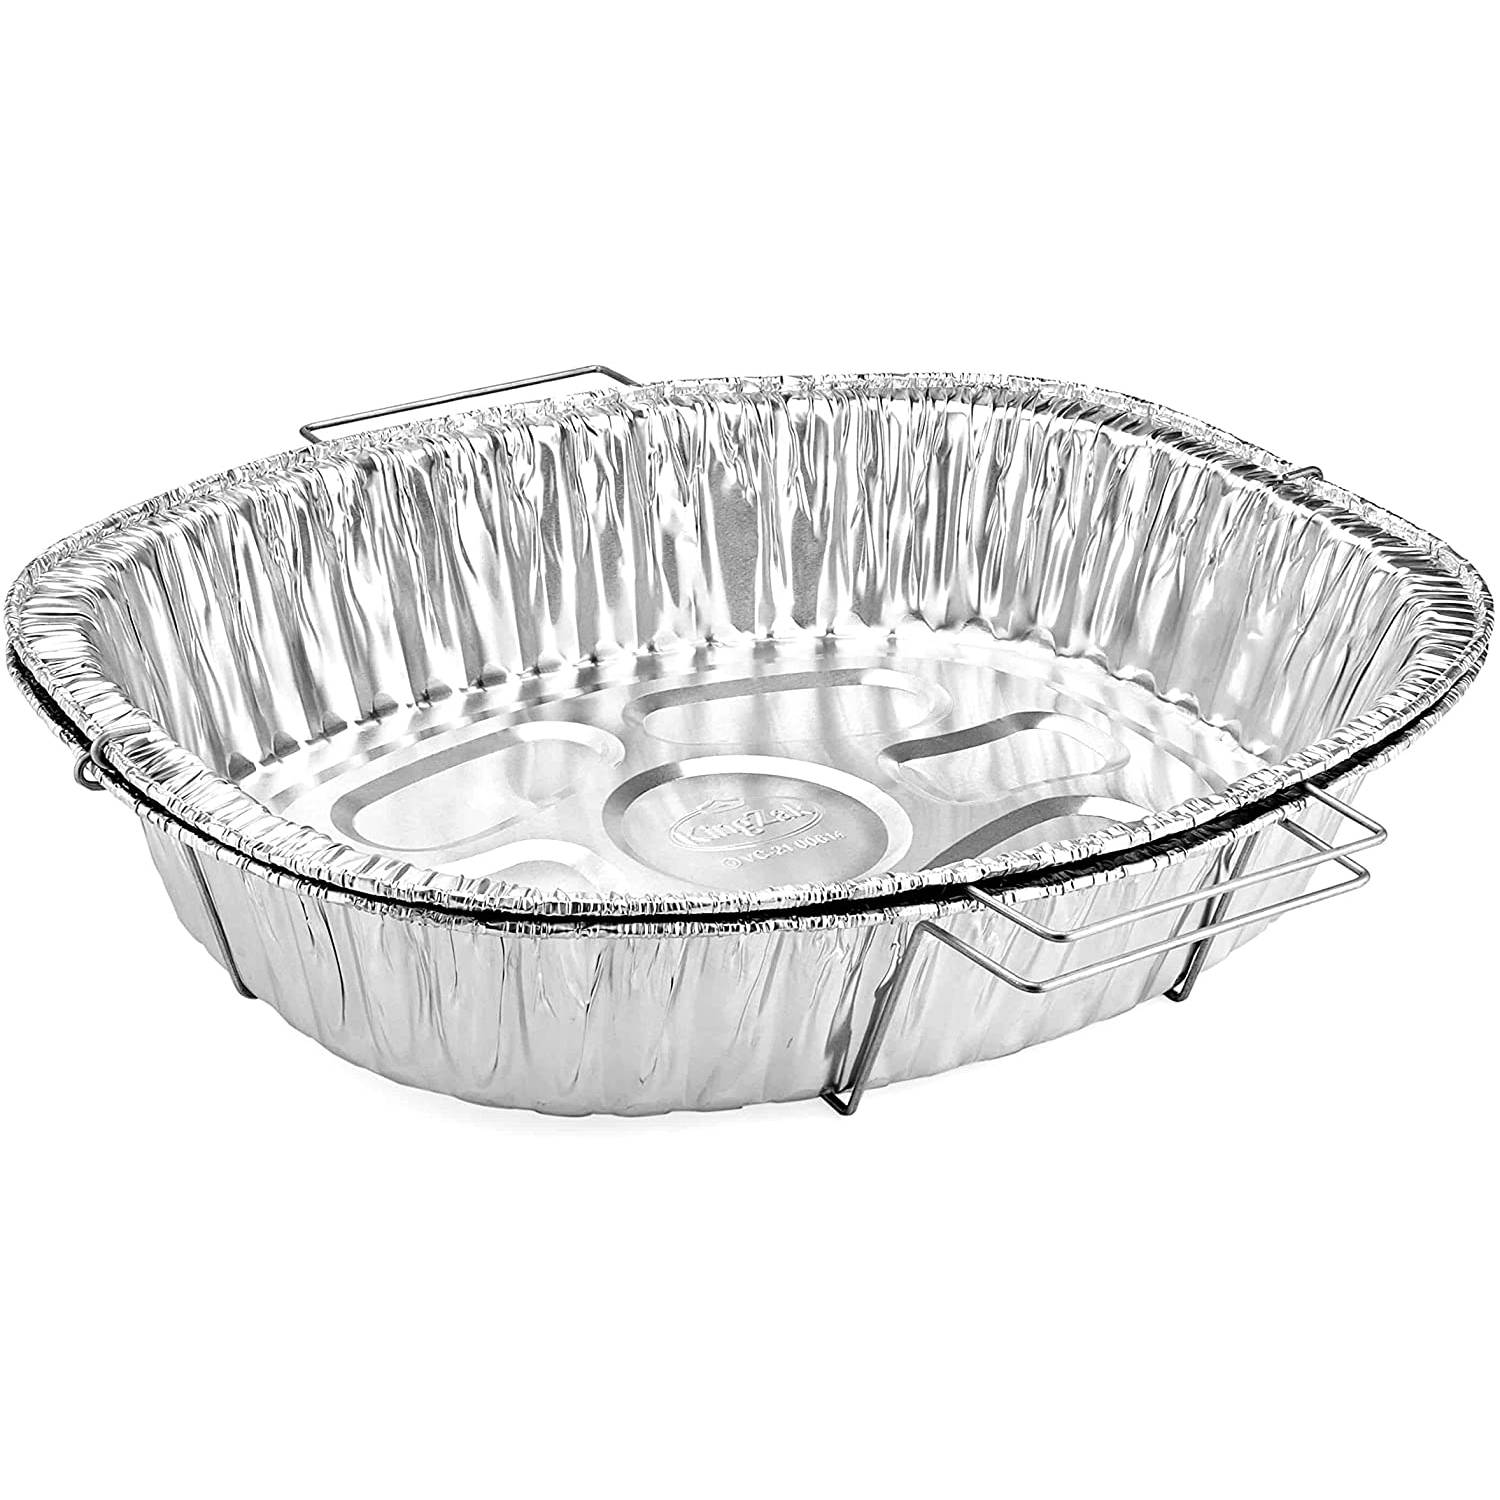 Durable Disposable Aluminum Foil Steam Roaster Baking Pans, Deep, Heavy  Duty Baking Roasting Broiling 21 x 13 x 3.5 inches Thanksgiving Turkey  Dinner